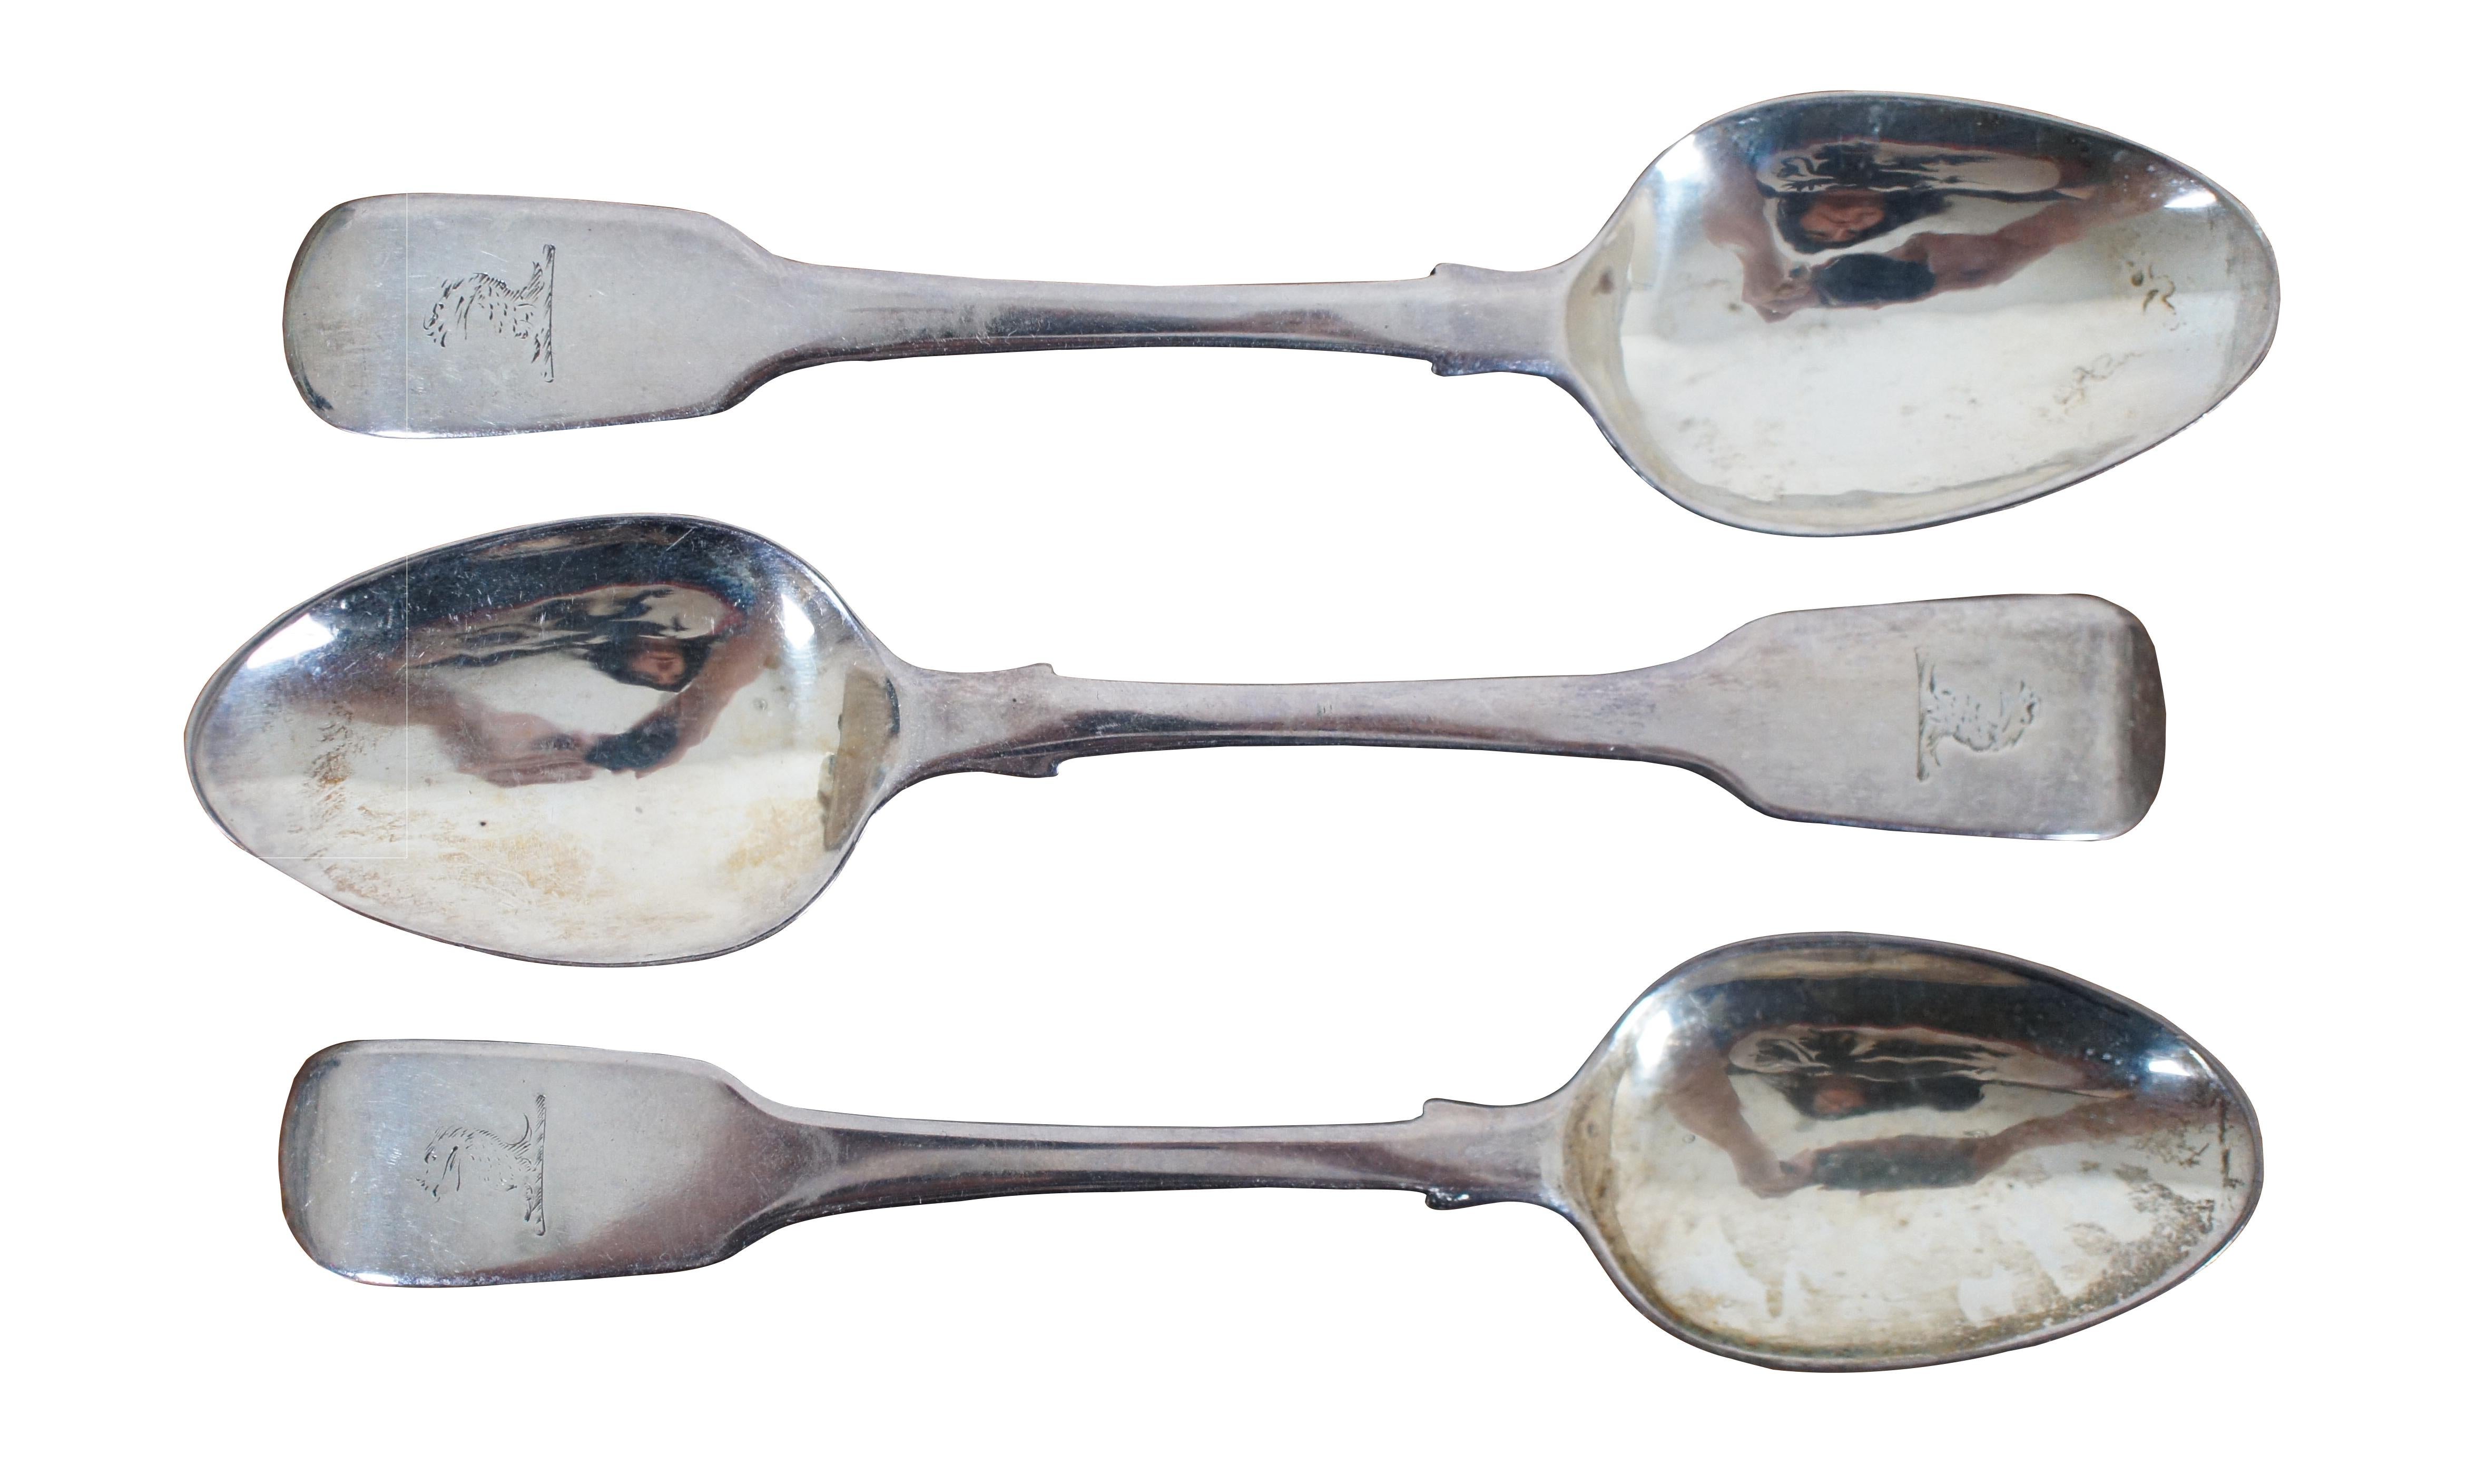 Set of three antique early 19th century sterling silver teaspoons with tipped fiddle shaped handles, engraved with the head of a sea serpent or dragon; made in 1821 by William Bateman I of London.

